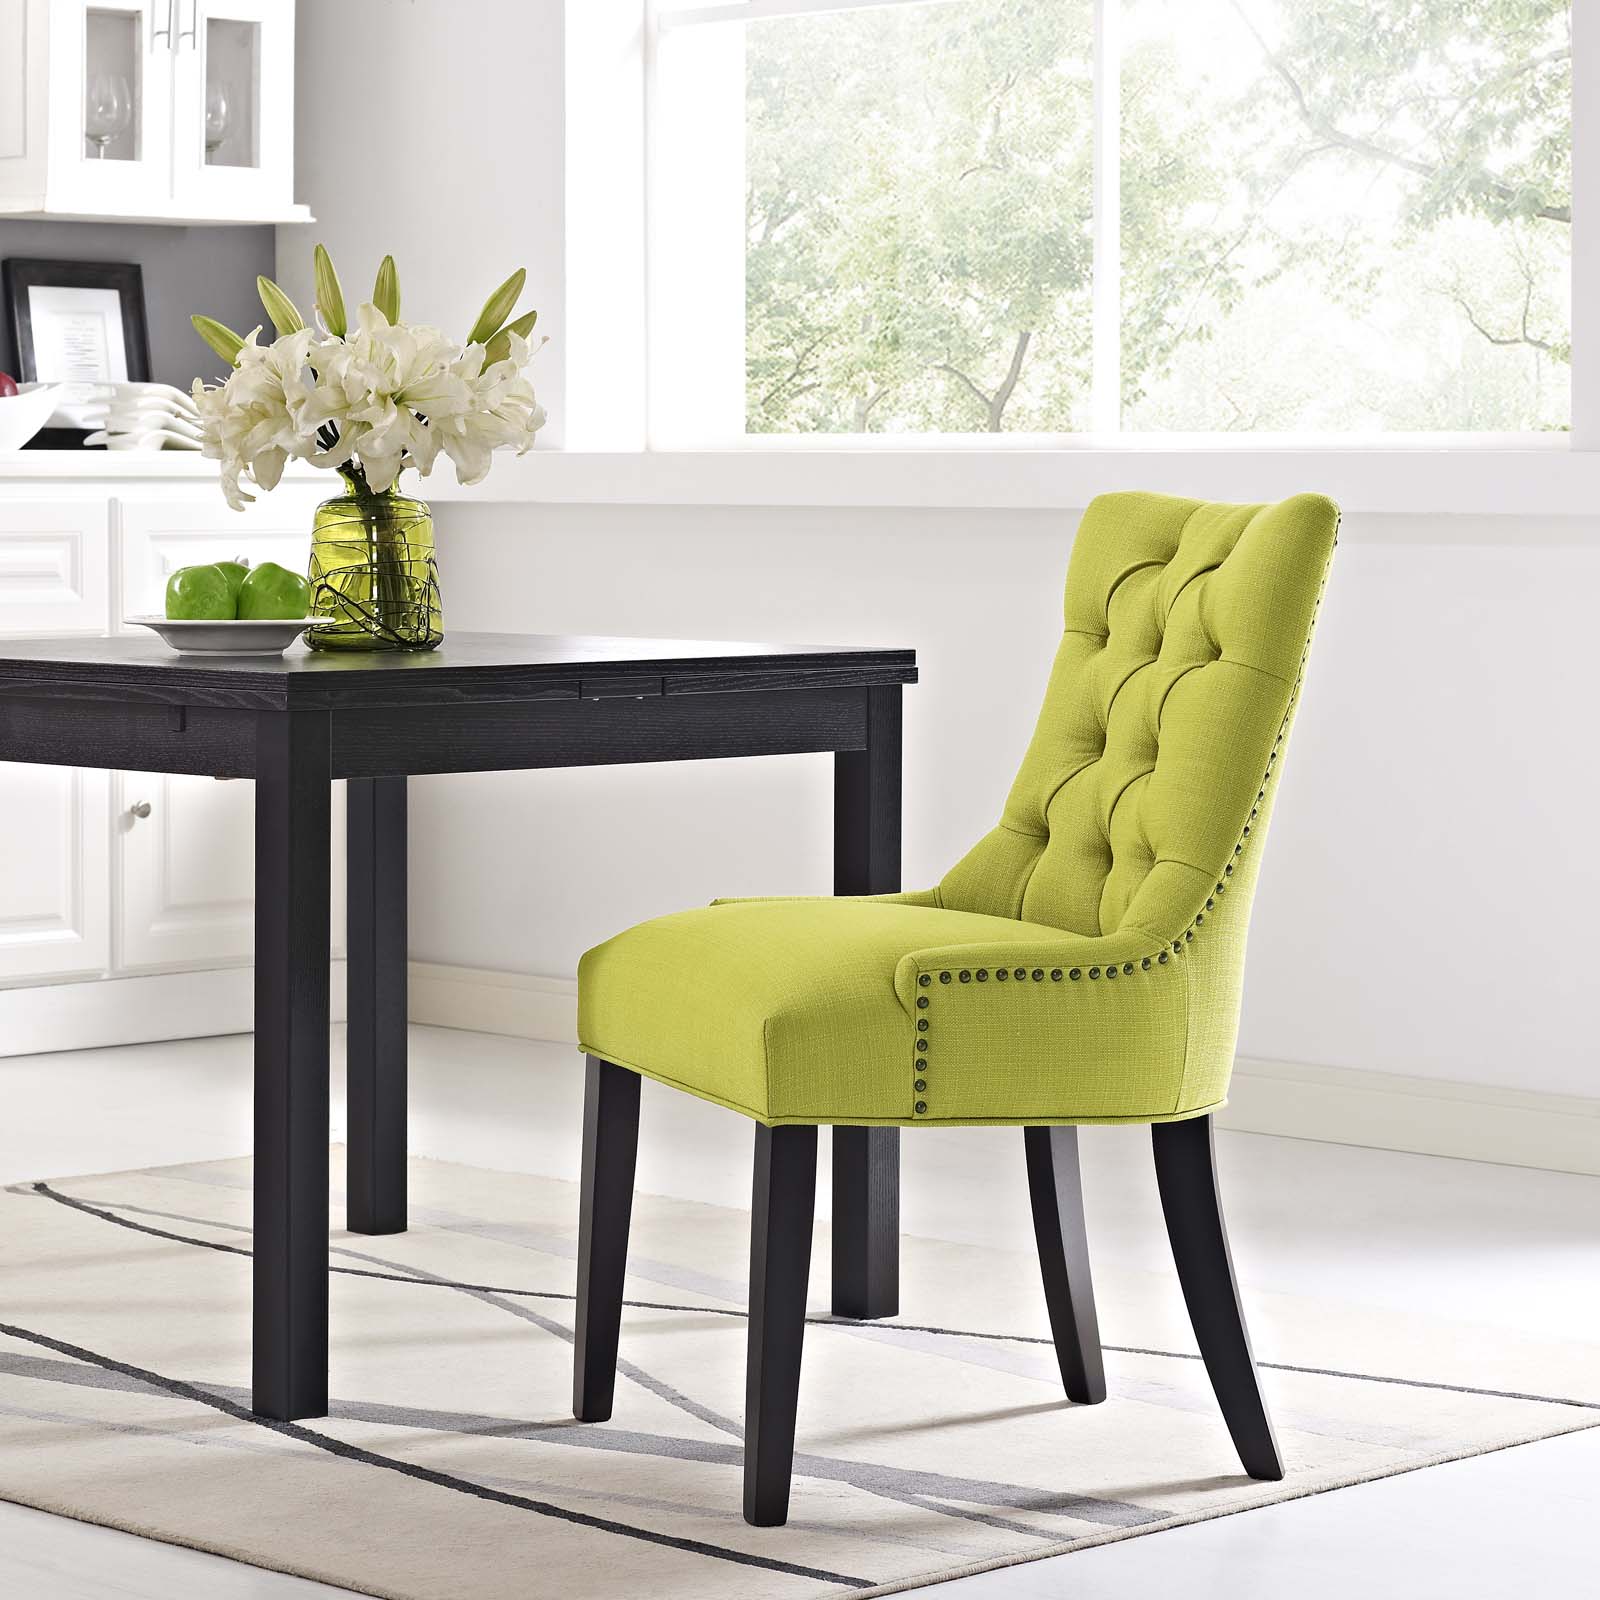 Modway Dining Chairs - Regent Tufted Fabric Dining Side Chair Wheatgrass